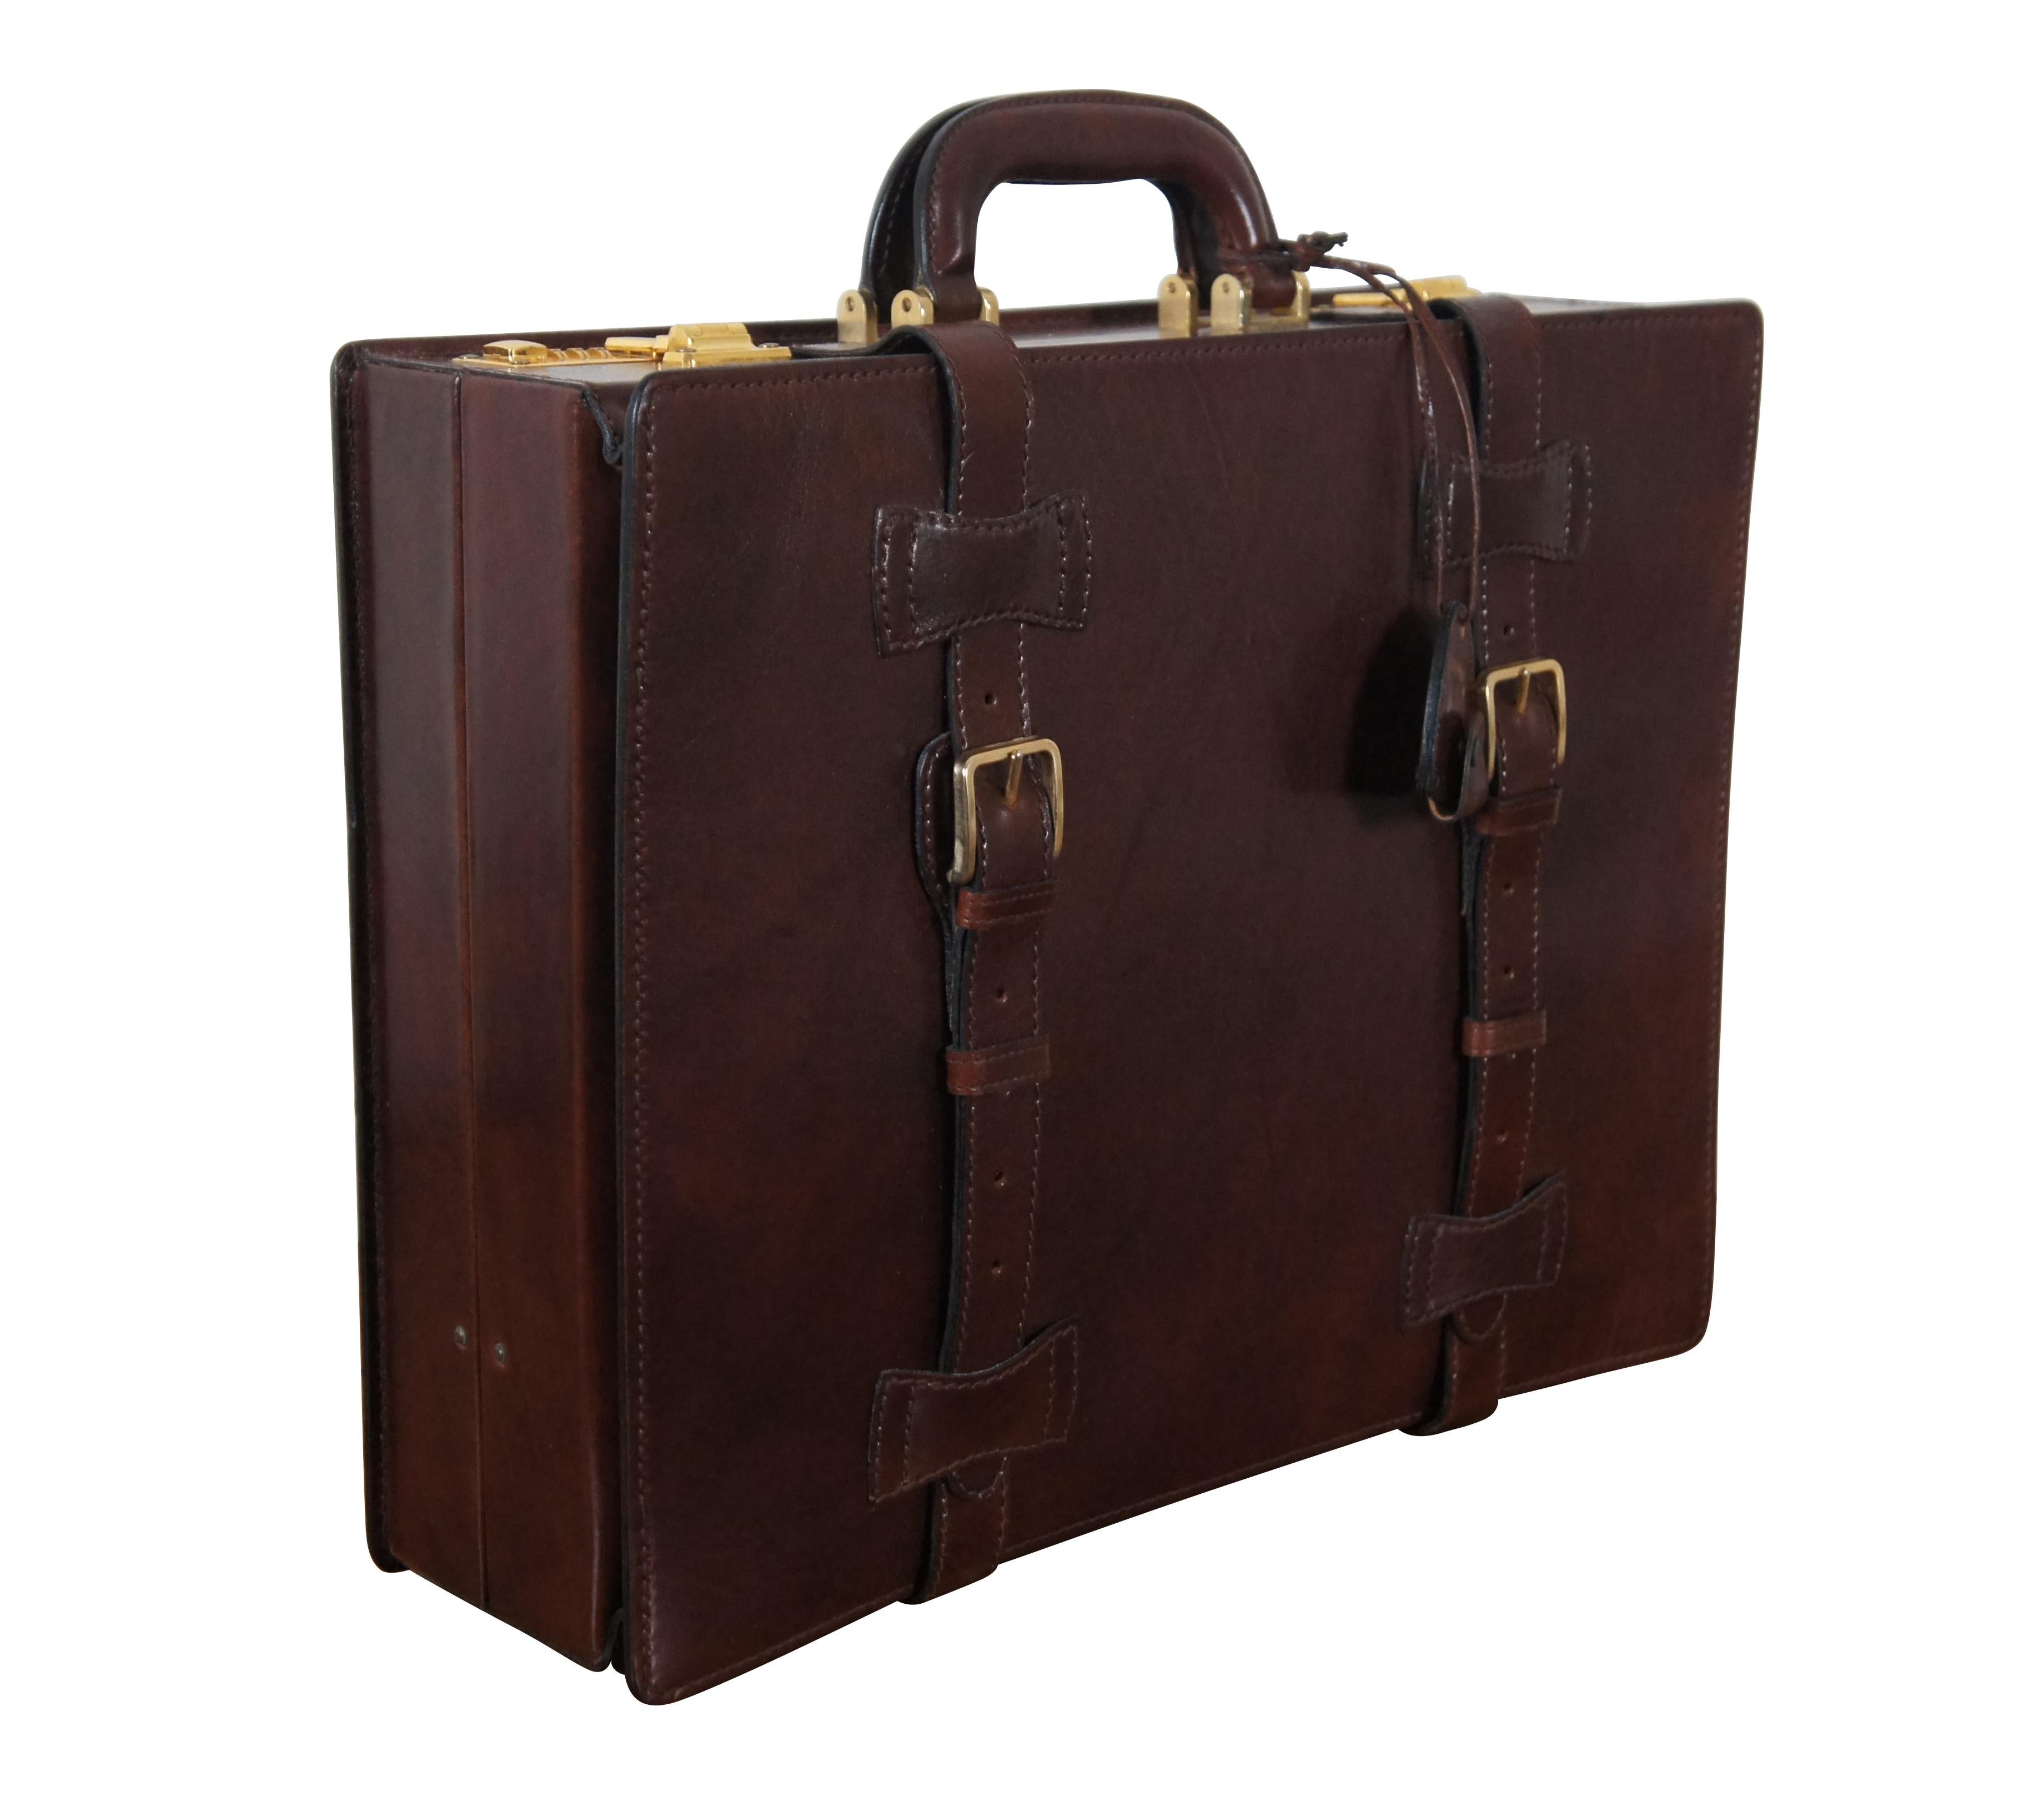 Vintage Bally dark brown leather brief case. Features brass feet, expandable front with two decorative buckle straps, and double latches with Presto combination locks (currently set to default combination 000). Interior features beige / off white